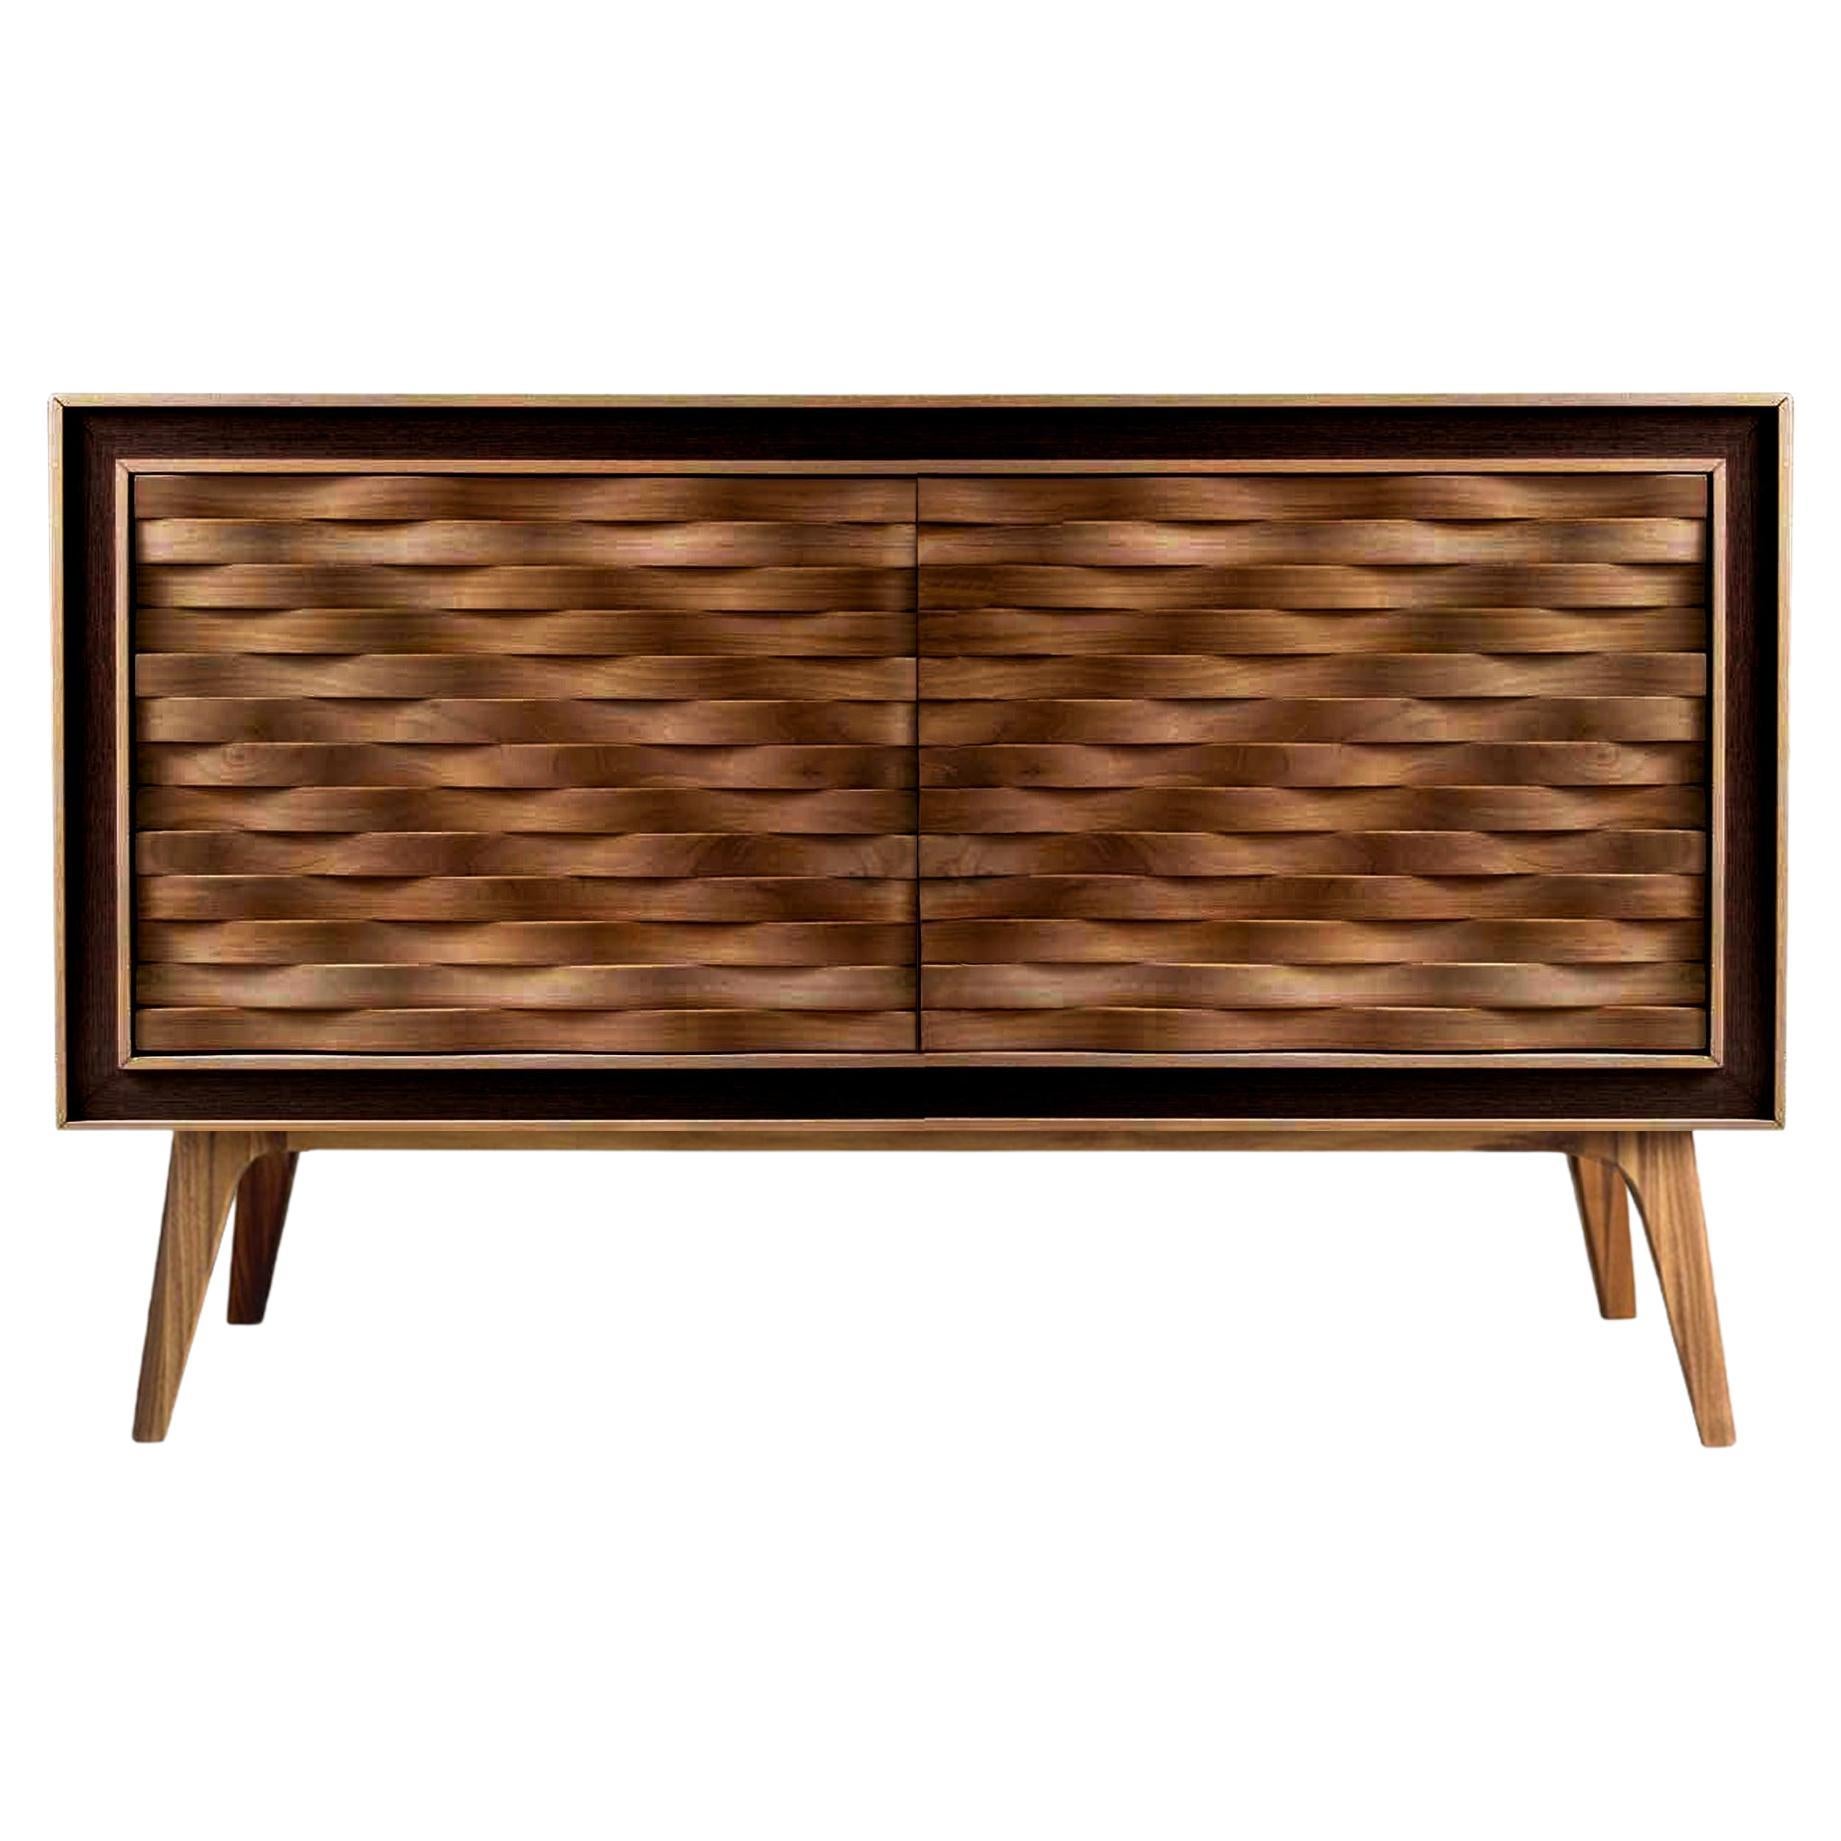 Quadra Nastro Solid Wood Sideboard, Walnut in Natural Finish, Contemporary For Sale